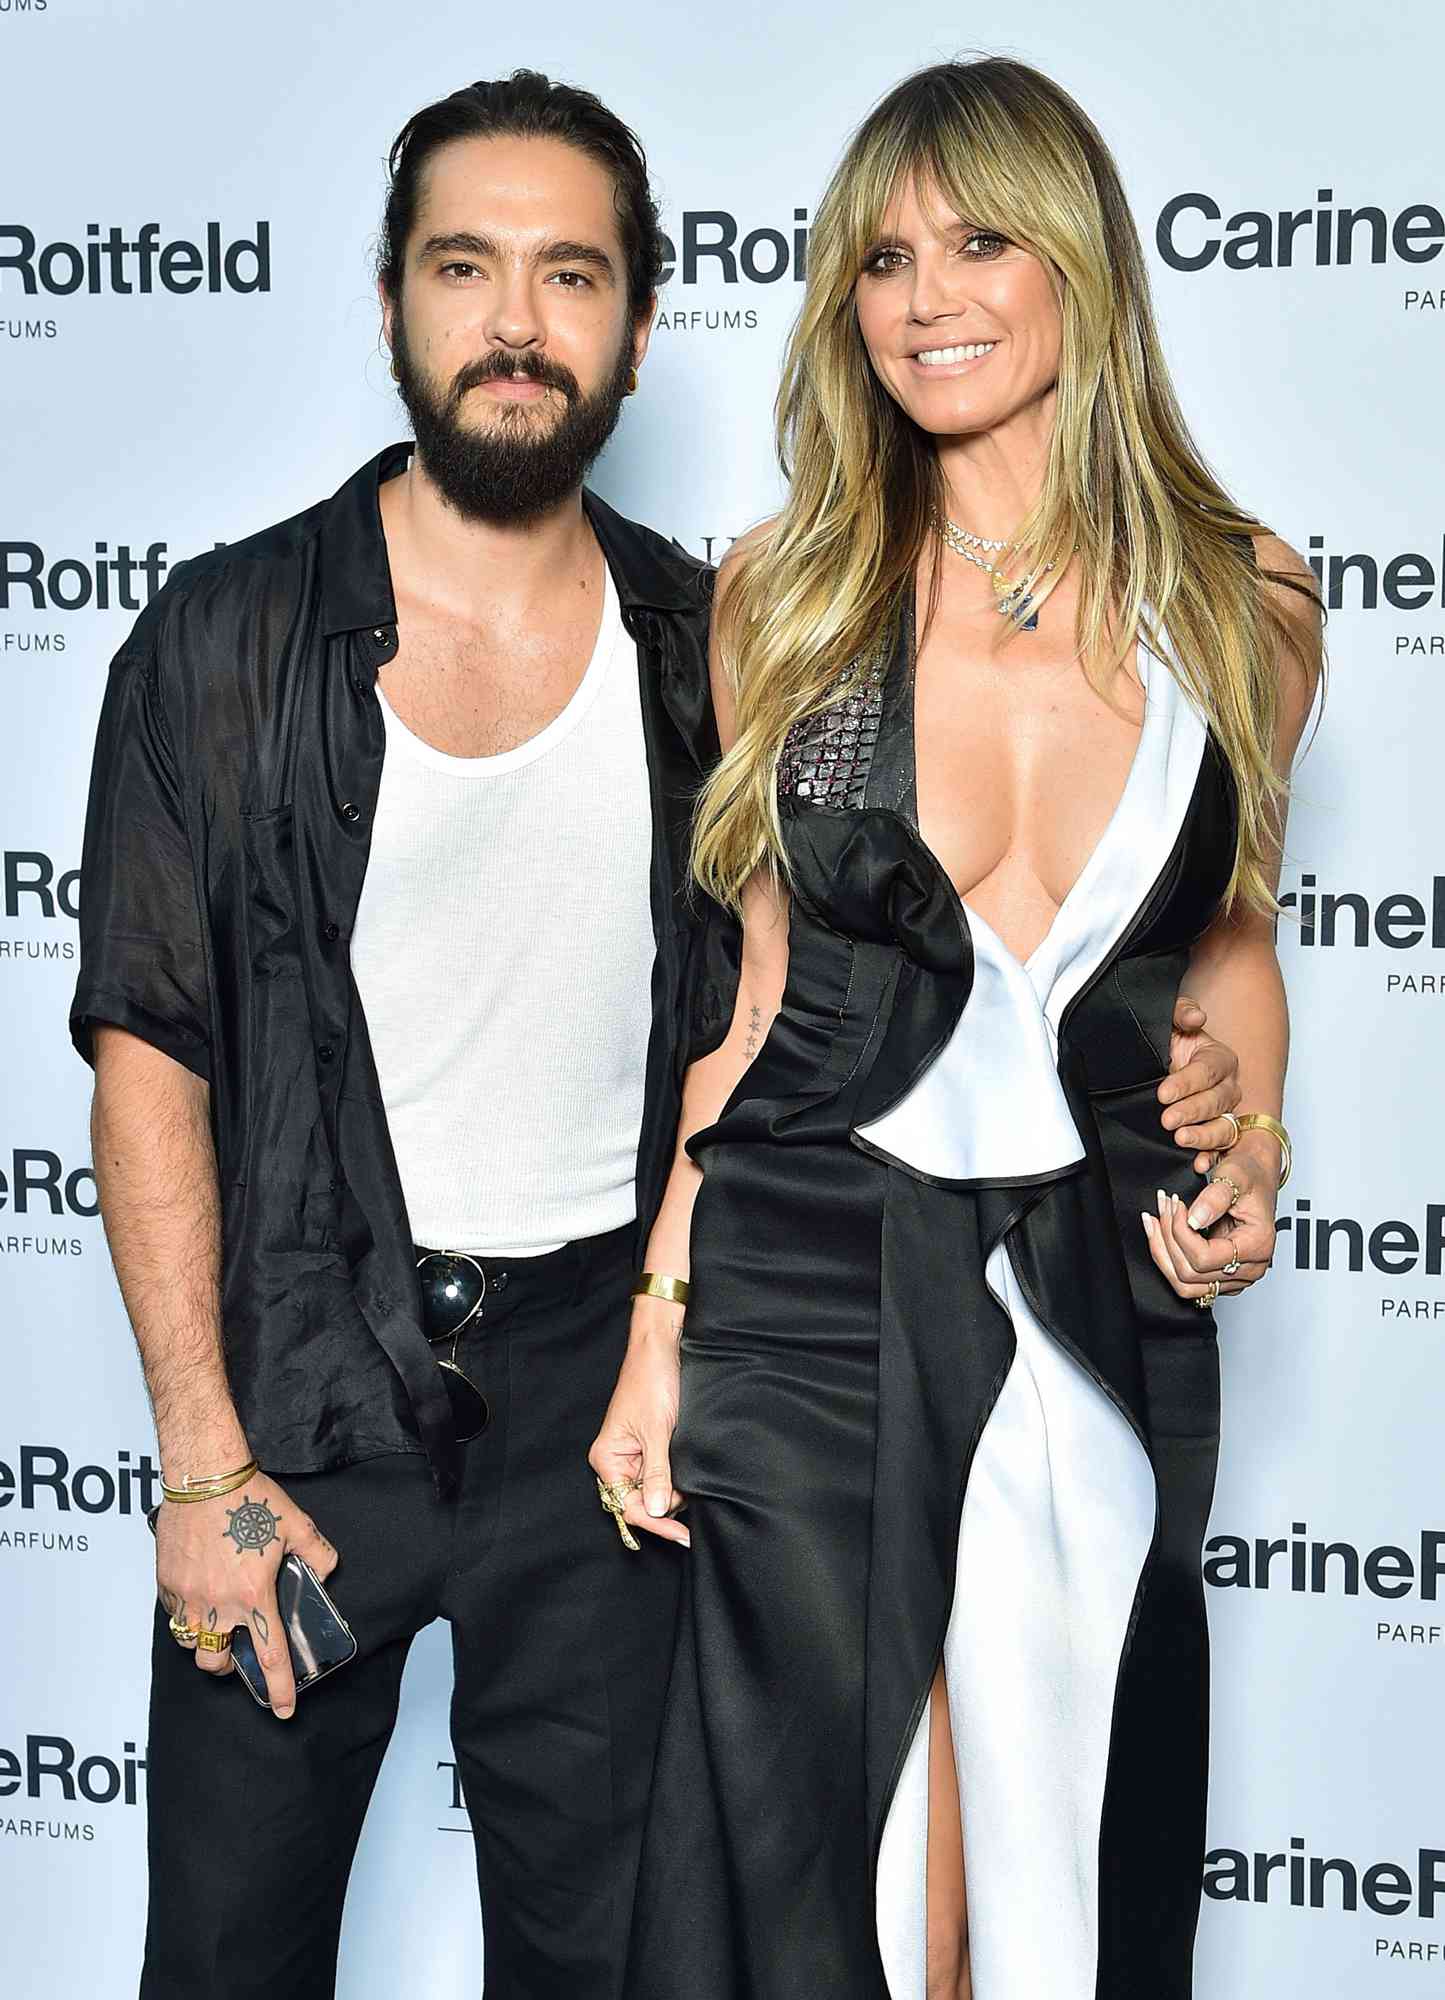 Tom Kaulitz and Heidi Klum attend the Carine Roitfeld Parfums "7 lovers" : Cocktail At The Peninsula Hotel In Paris on July 01, 2019 in Paris, France